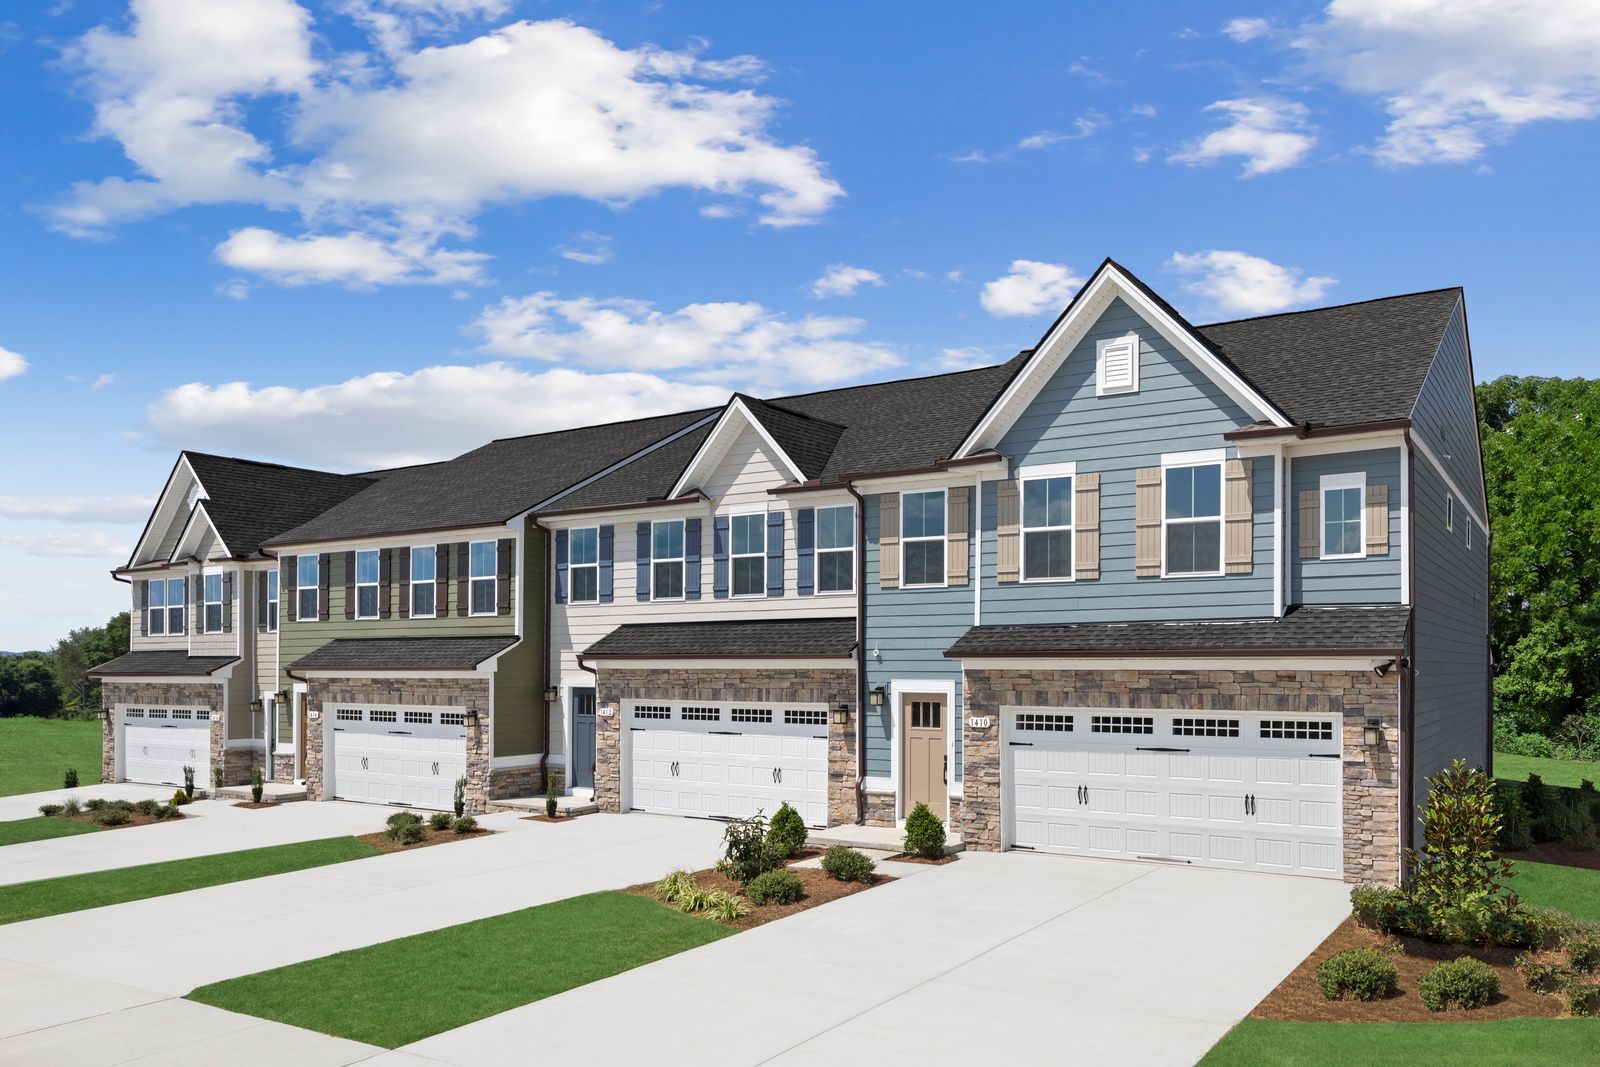 WELCOME HOME TO TOWNS AT CEDAR CREST IN STOW—SINGLE FAMILY STYLE LIVING